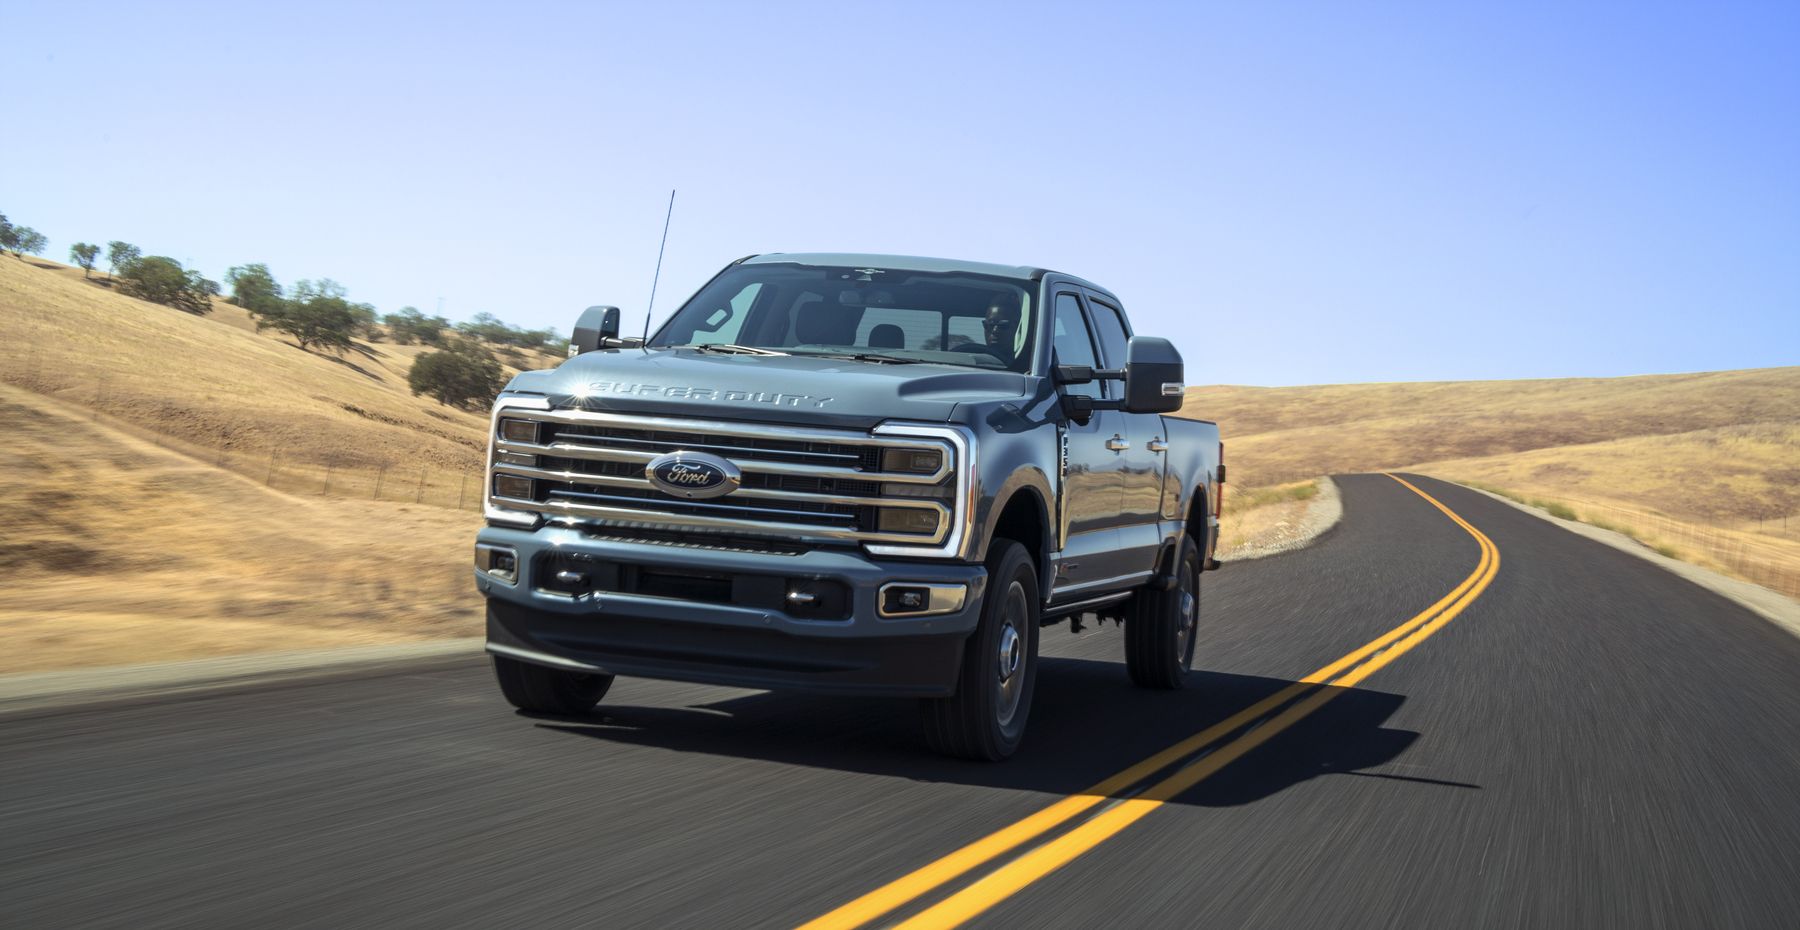 Ford claims best-in-class towing, payload, power for 2023 Super Duty